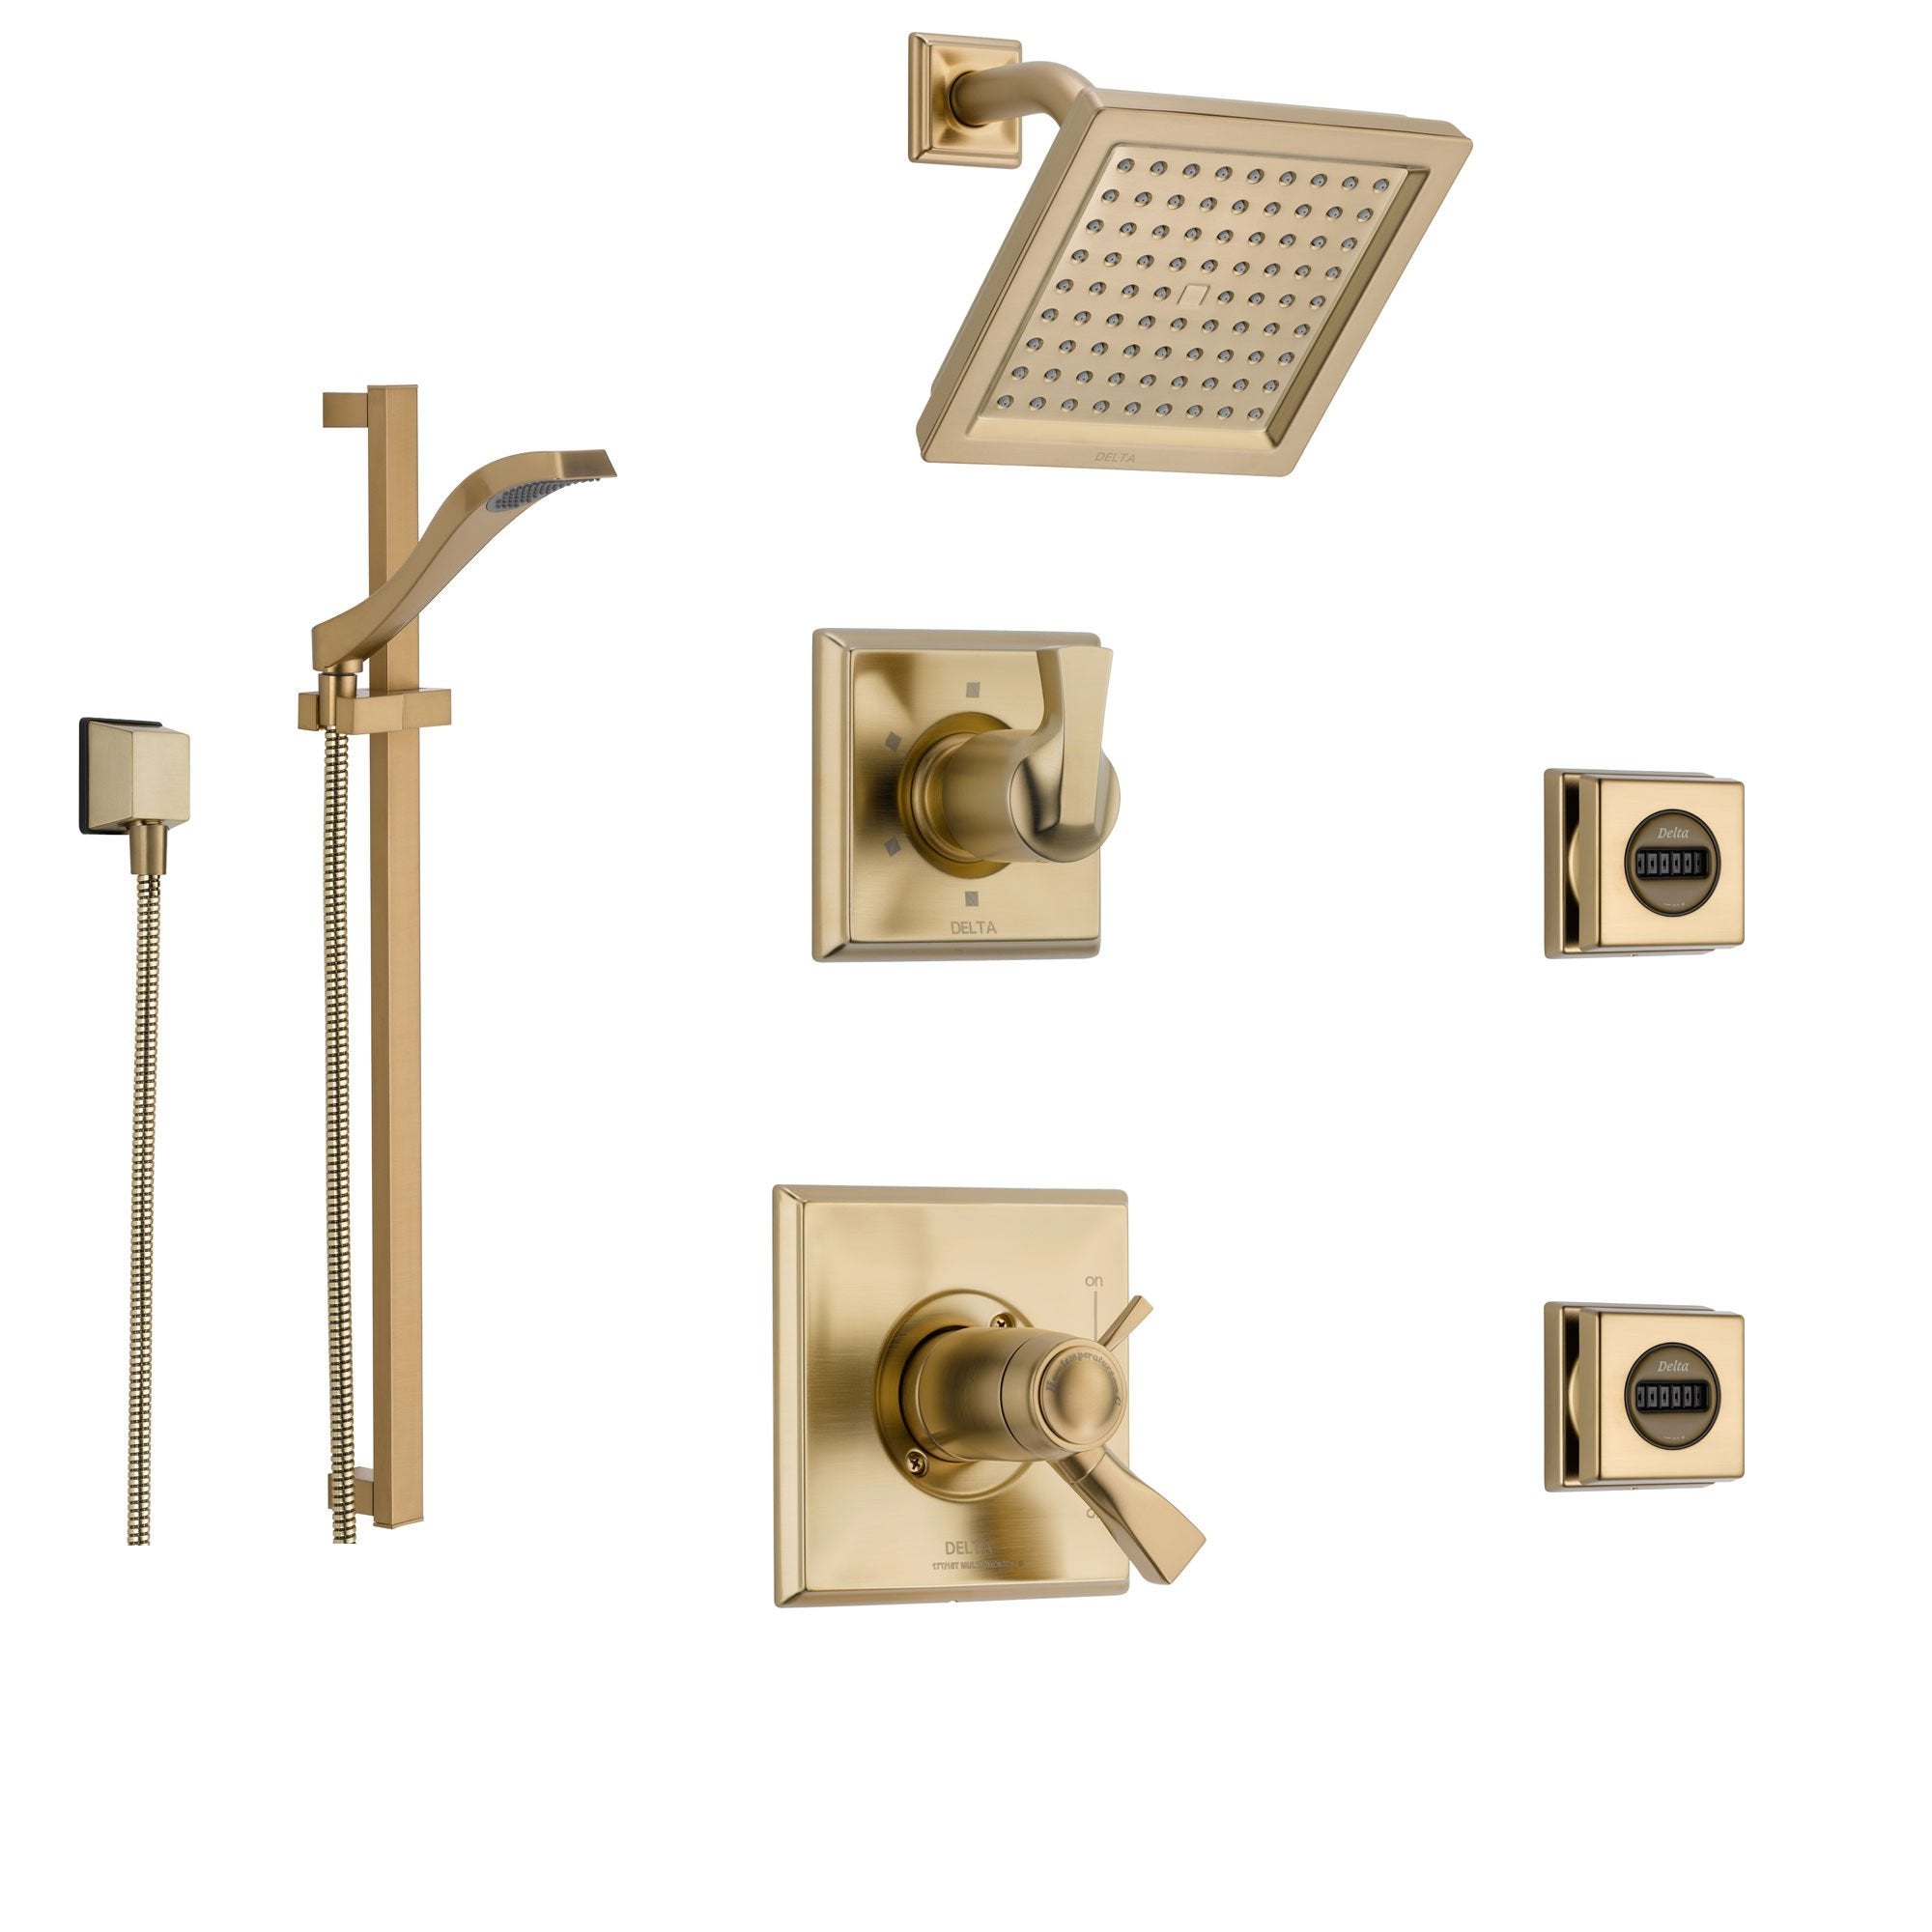 Delta Dryden Champagne Bronze Shower System with Thermostatic Shower Handle, 6-setting Diverter, Modern Square Showerhead, Hand Shower Spray, and 2 Body Sprays SS17T5191CZ